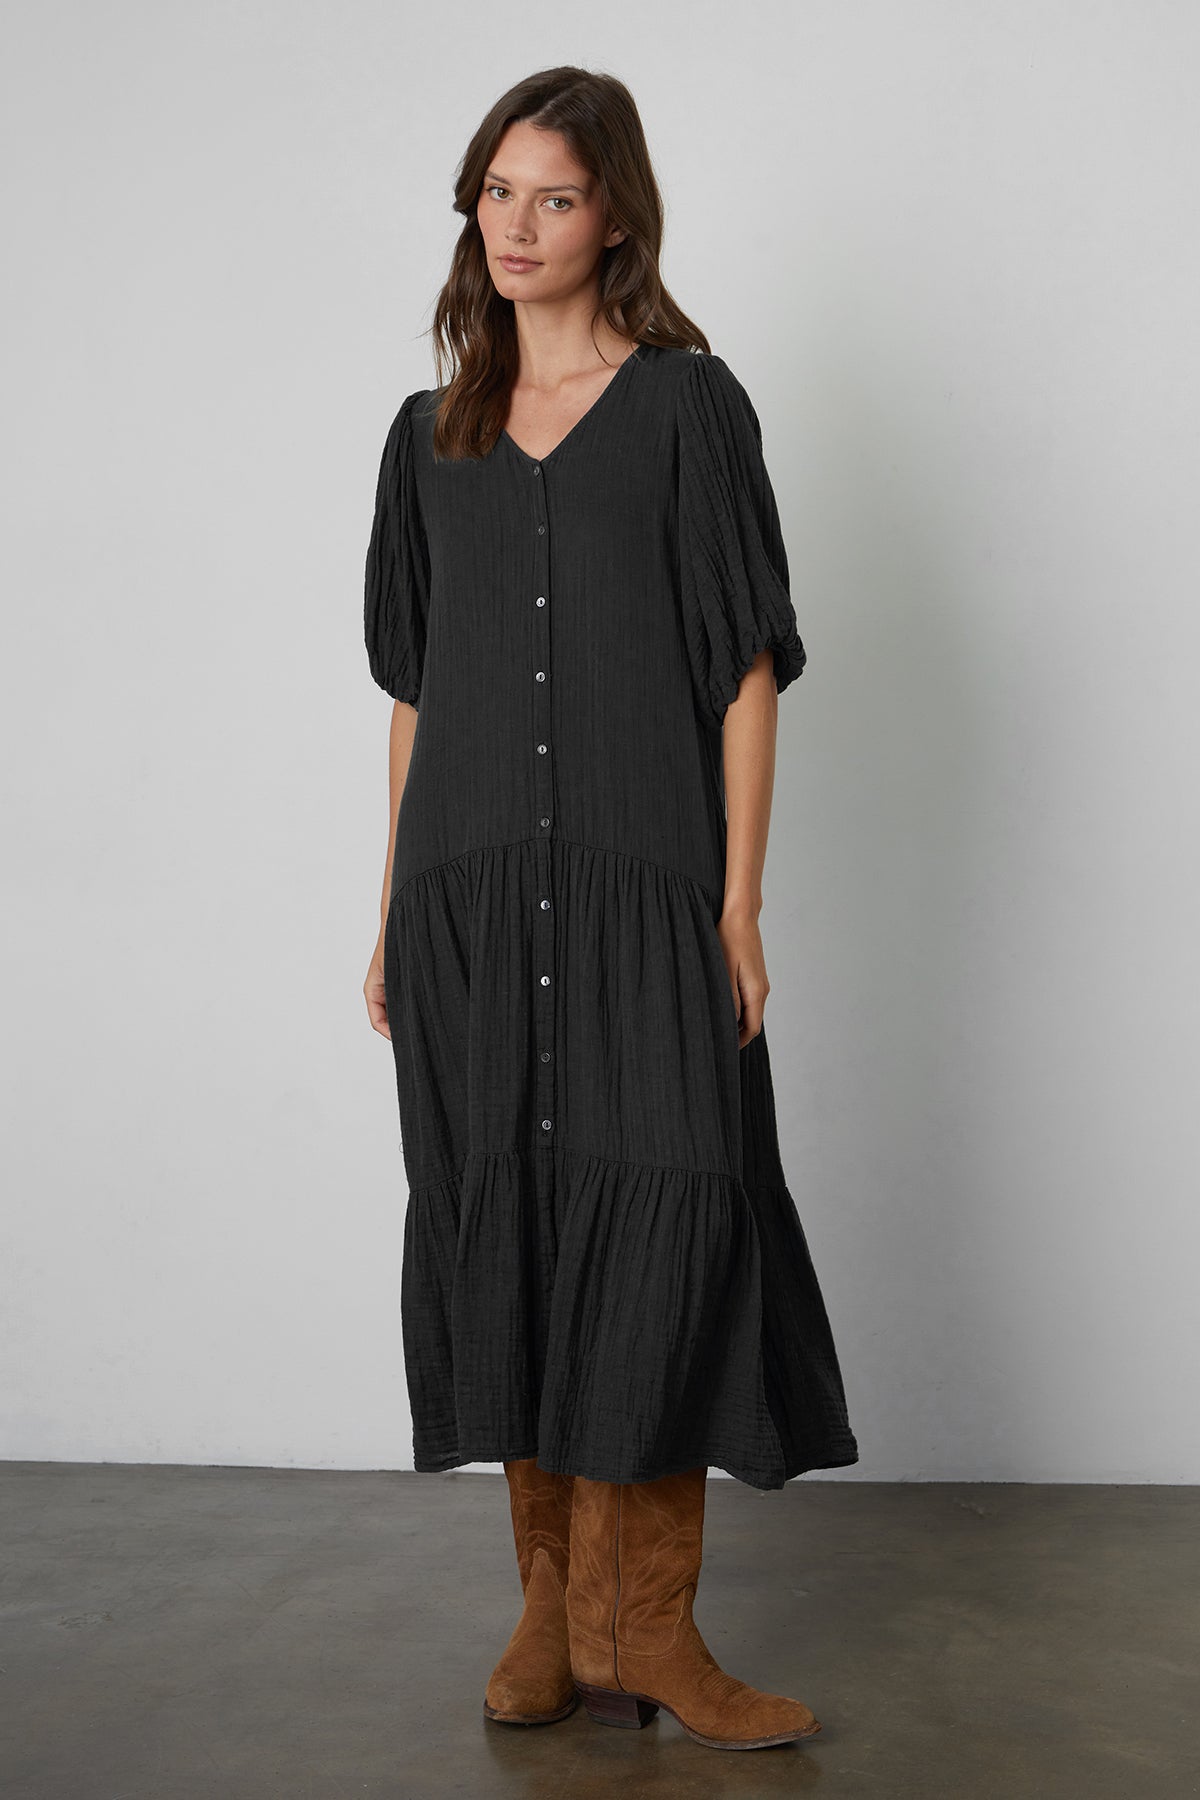   Pauline Cotton Gauze Midi Dress in Black front view with brown boots 